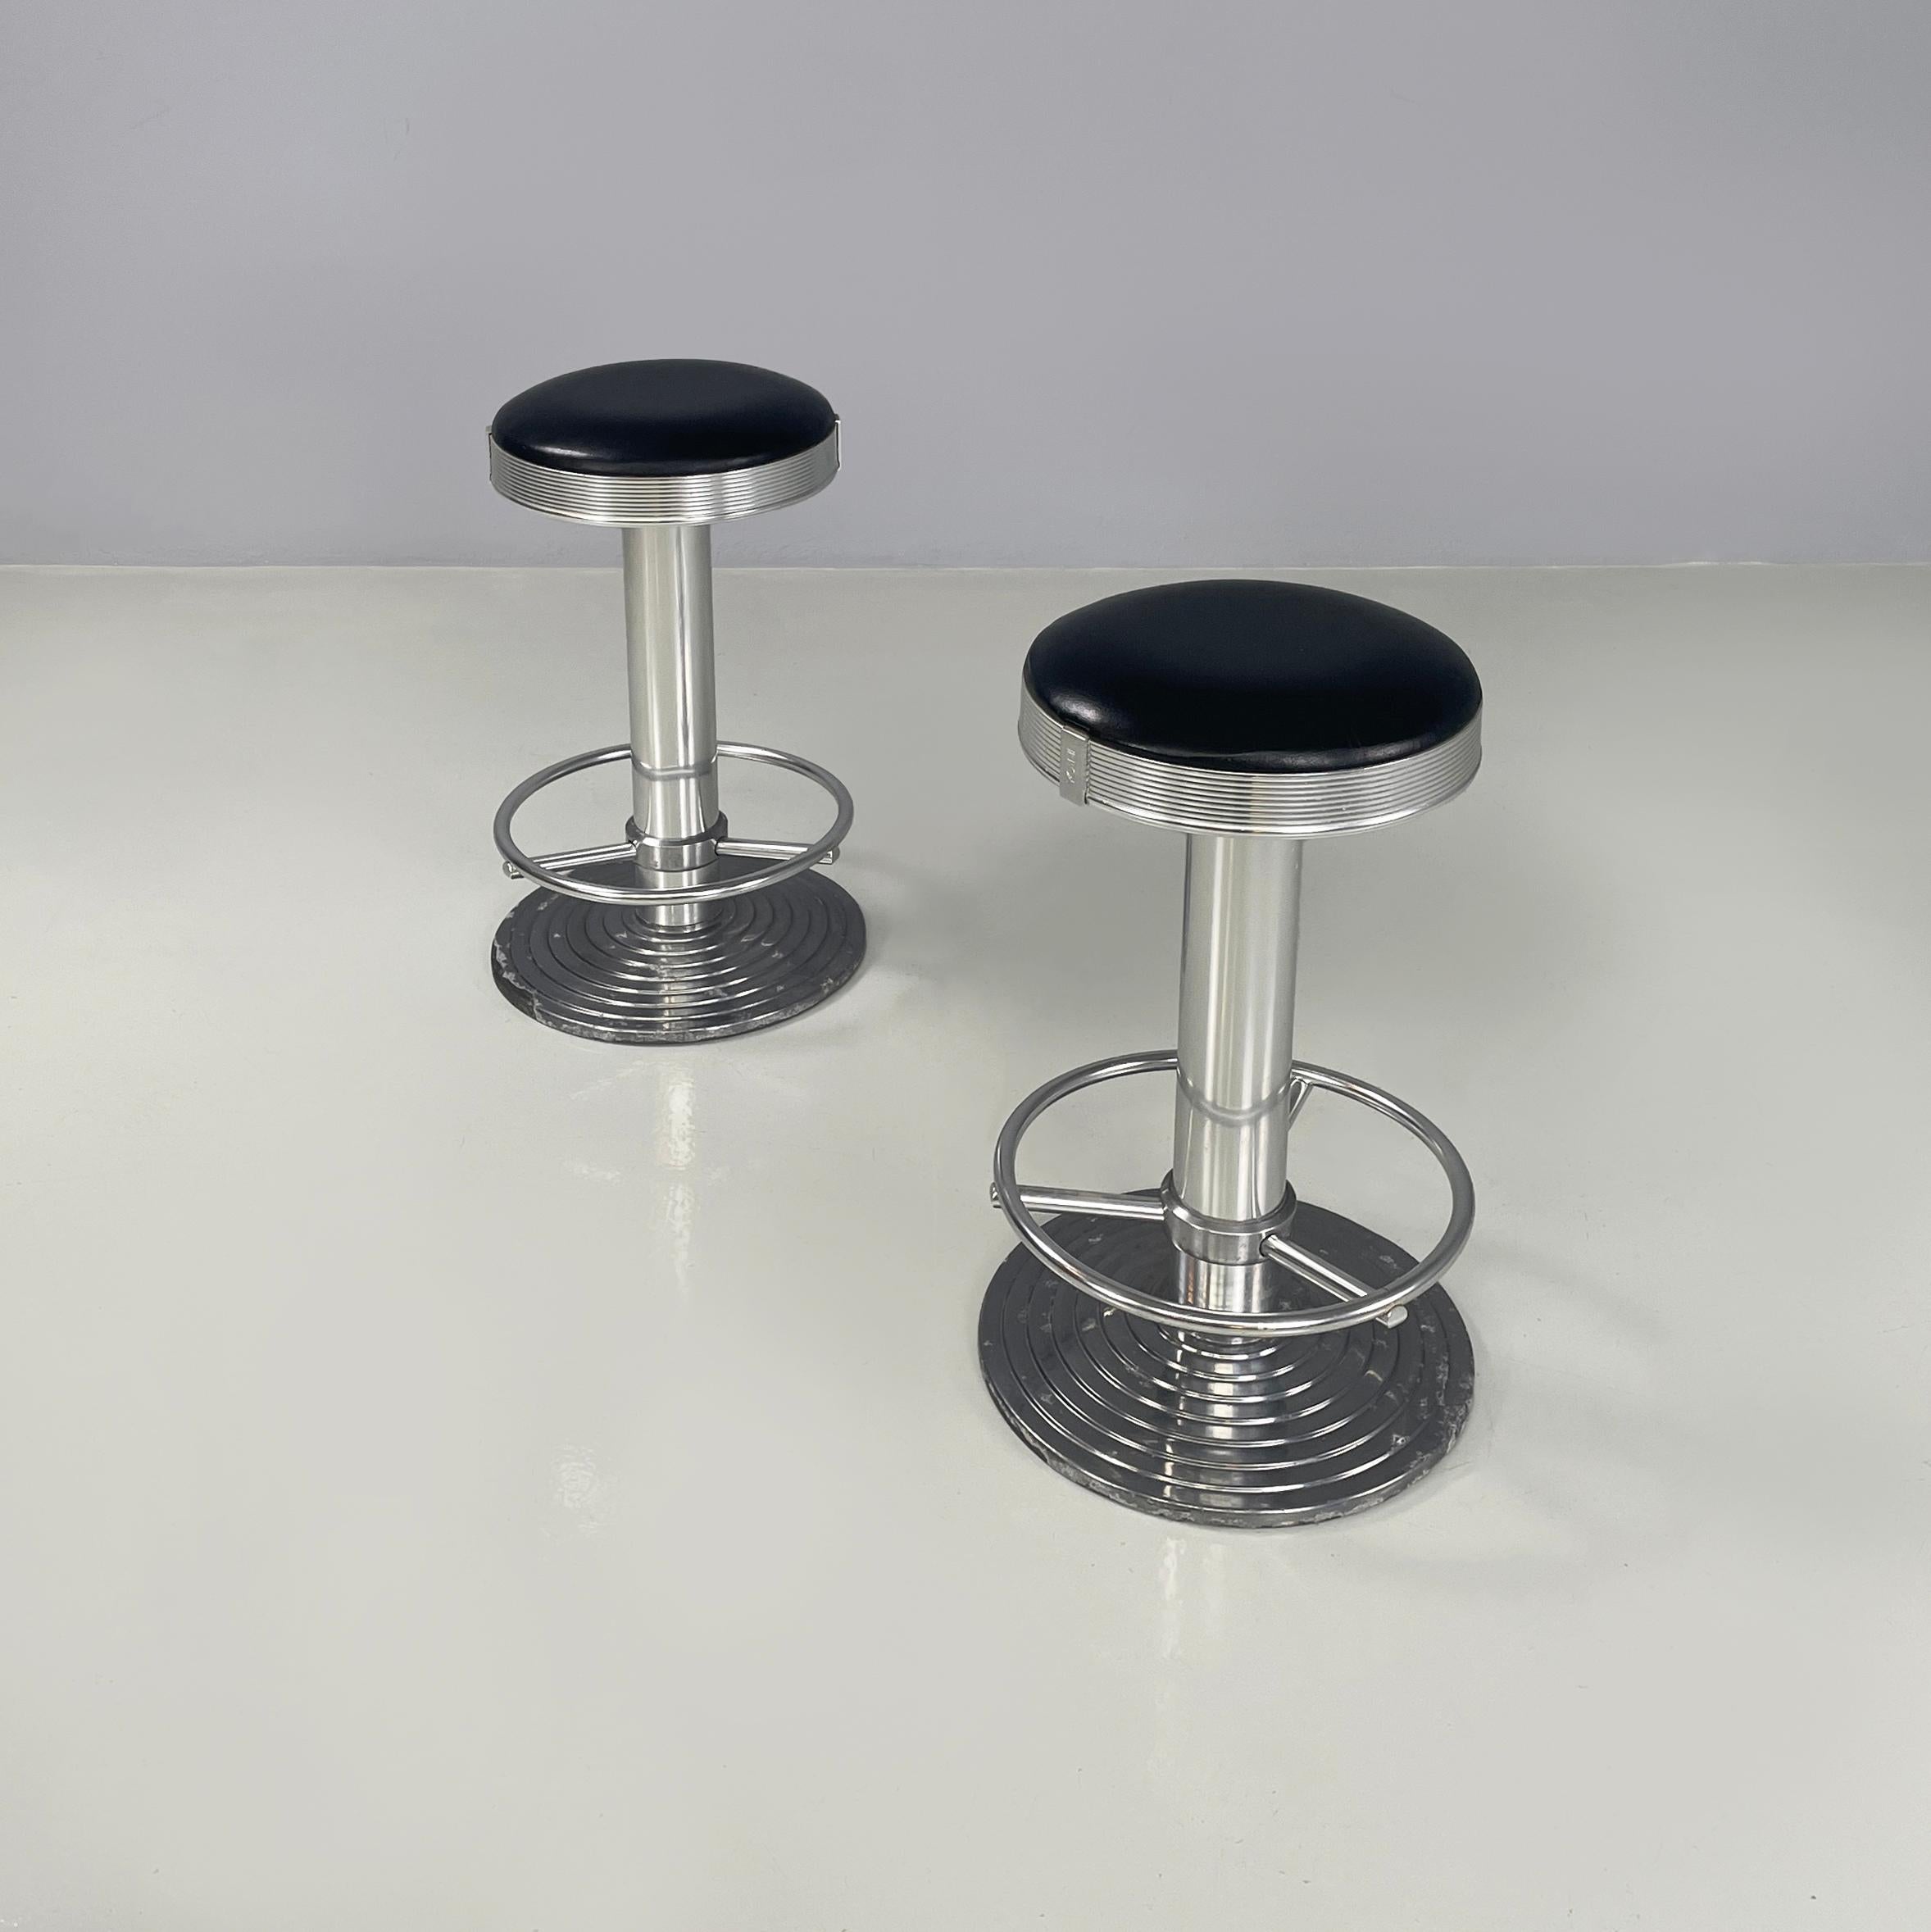 Italian Modern Aluminum and black leather bar stools Billy by Ycami, 1990s
Pair of bar stools mod. Billy with round seat padded and covered in black leather, with grooved aluminum profile. The structure is entirely made of aluminium. At the base